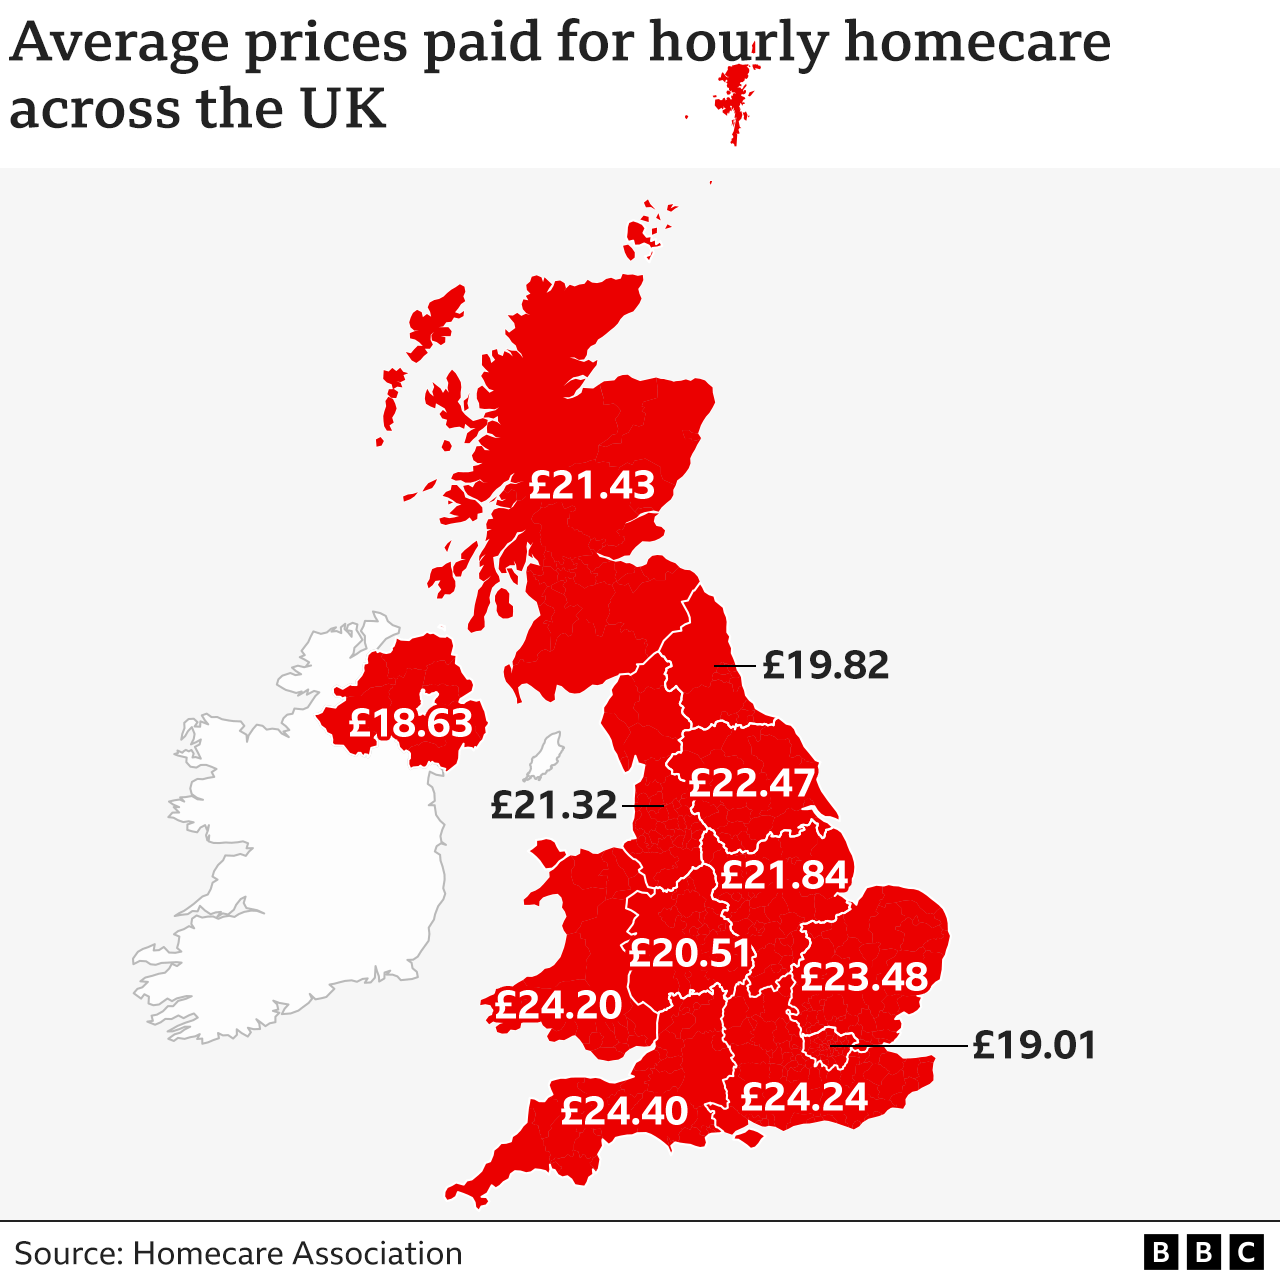 Chart showing average prices paid for hourly homecare across the UK